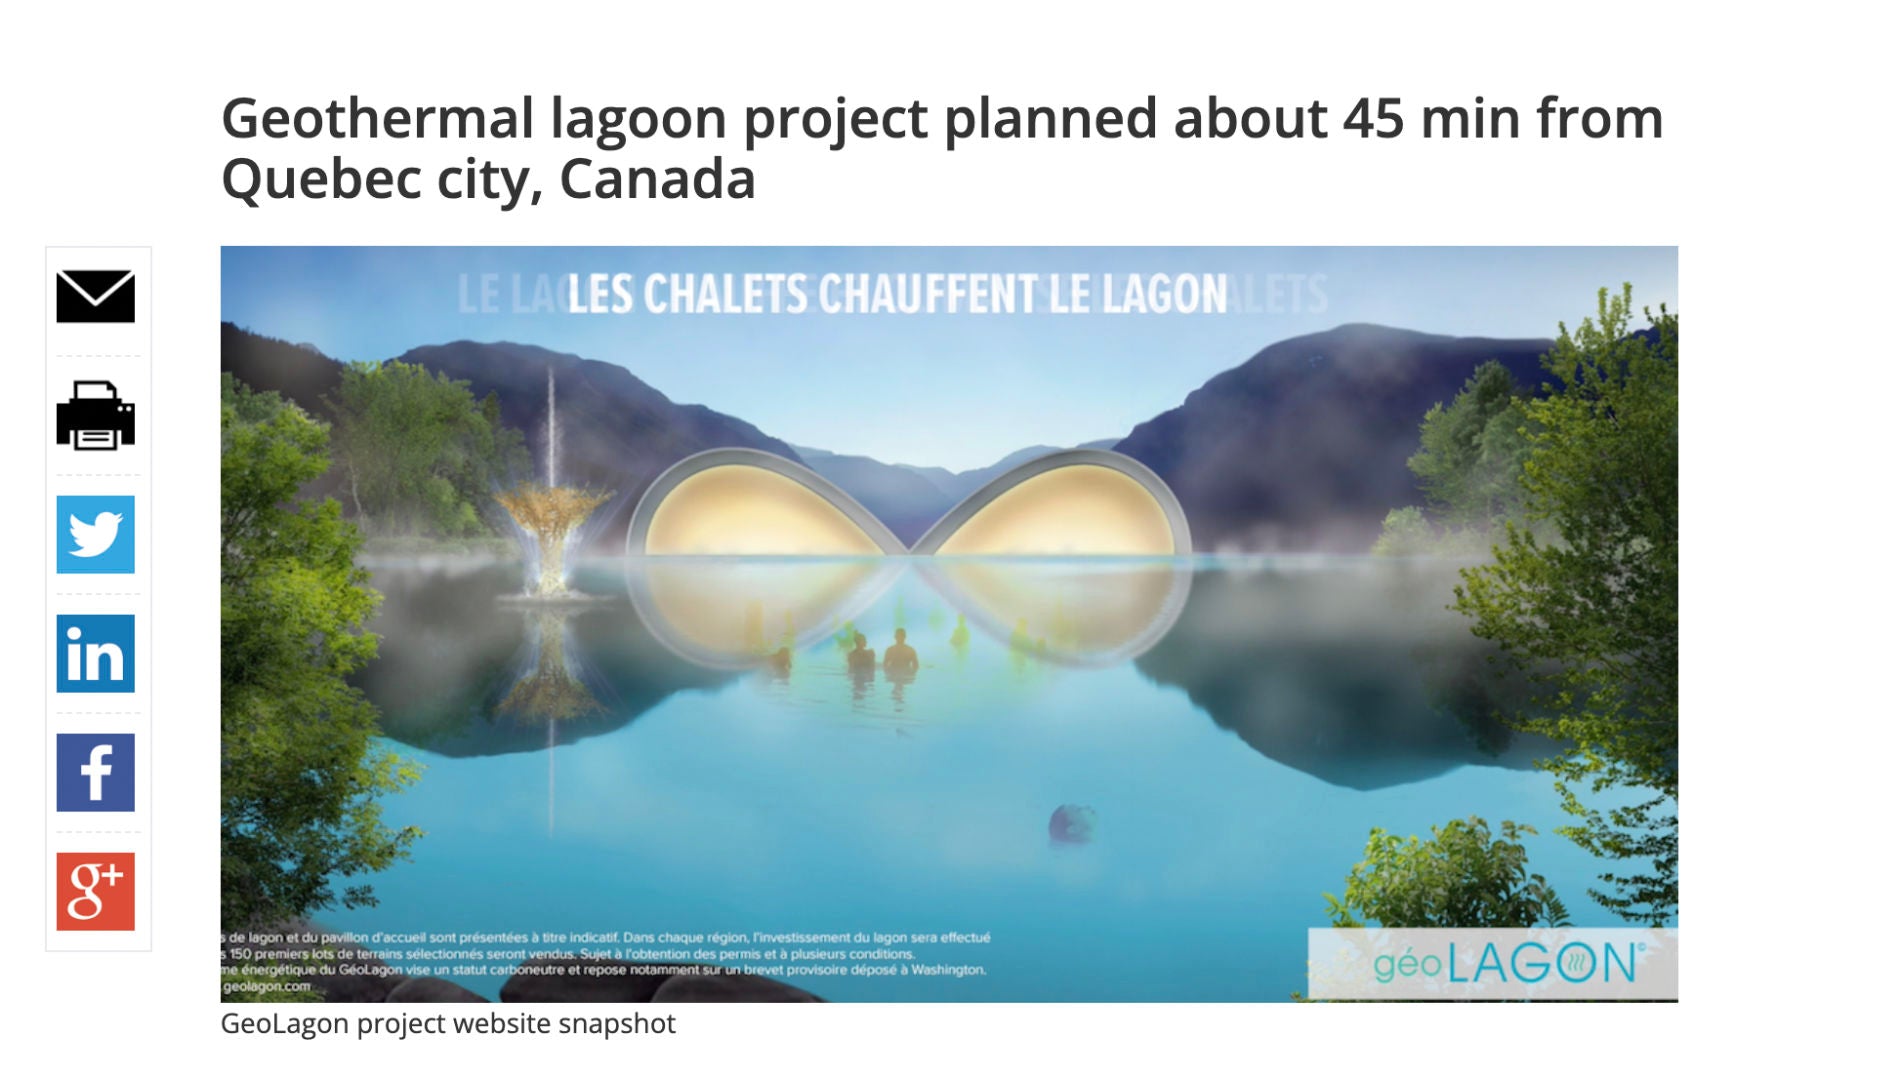 [EN] Geothermal lagoon project planned about 45 min from Quebec city, Canada